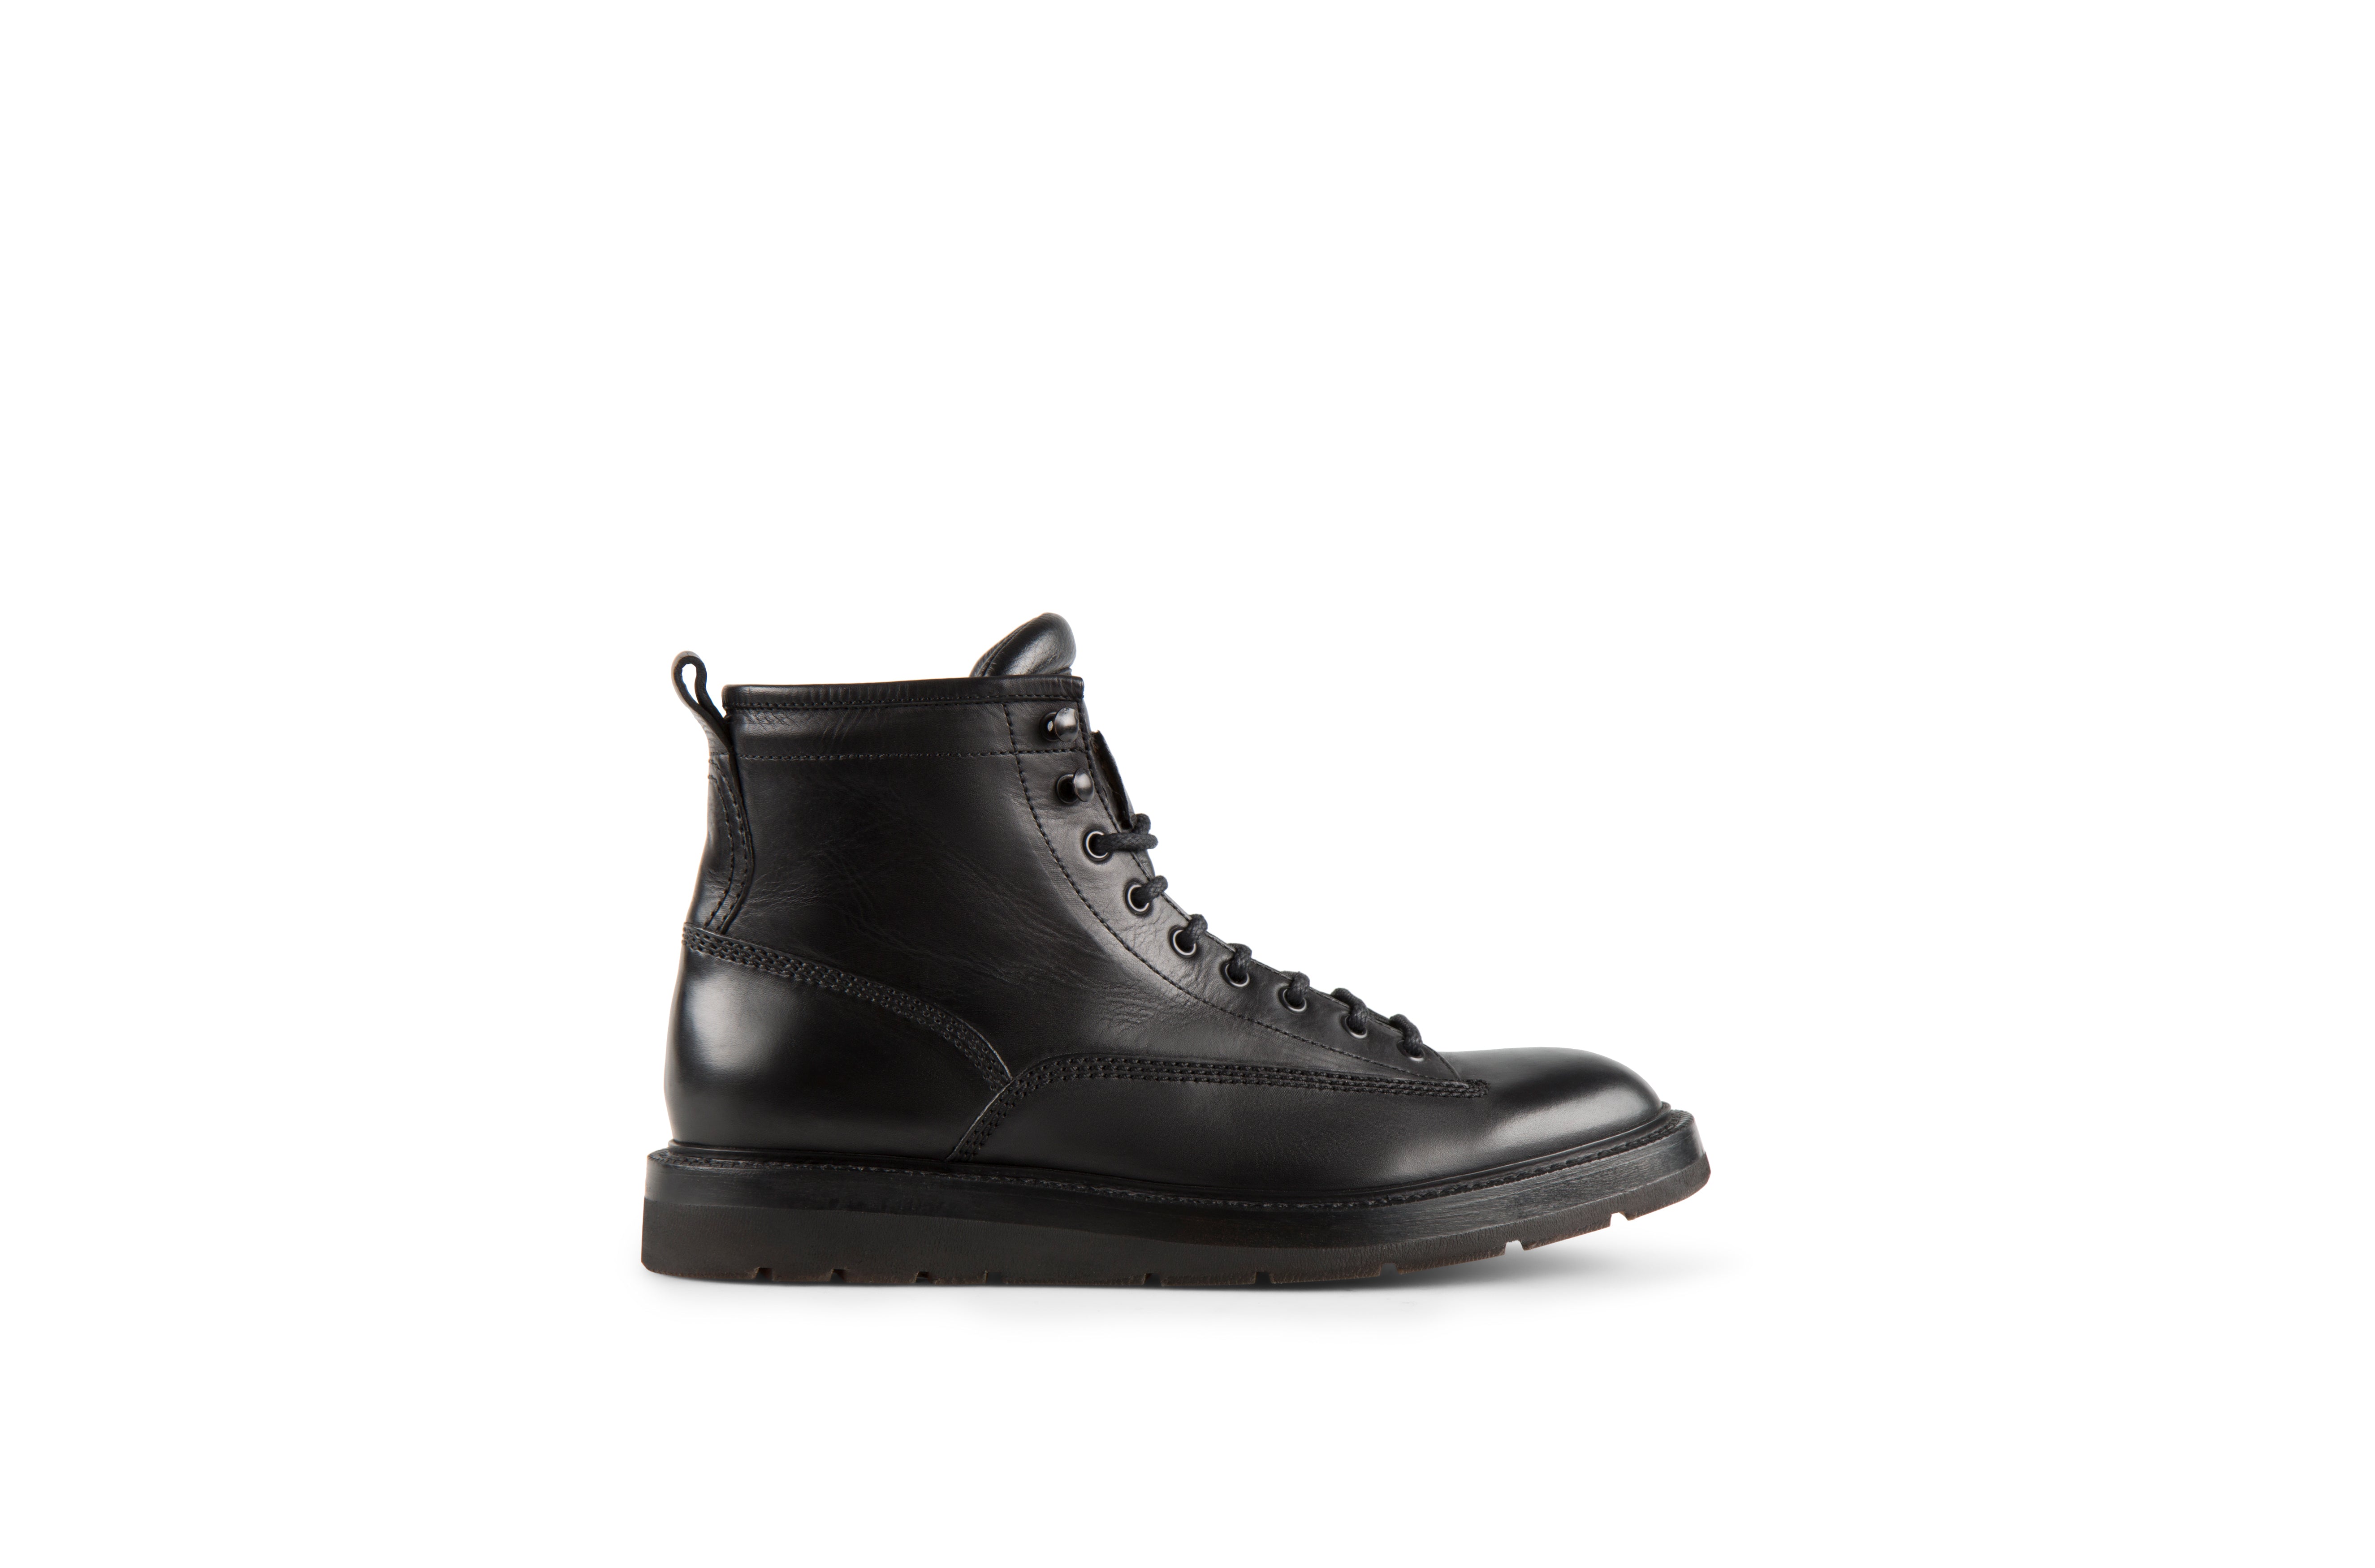 Nexx Black Vegetable Tanned Balmoral Leather Boots